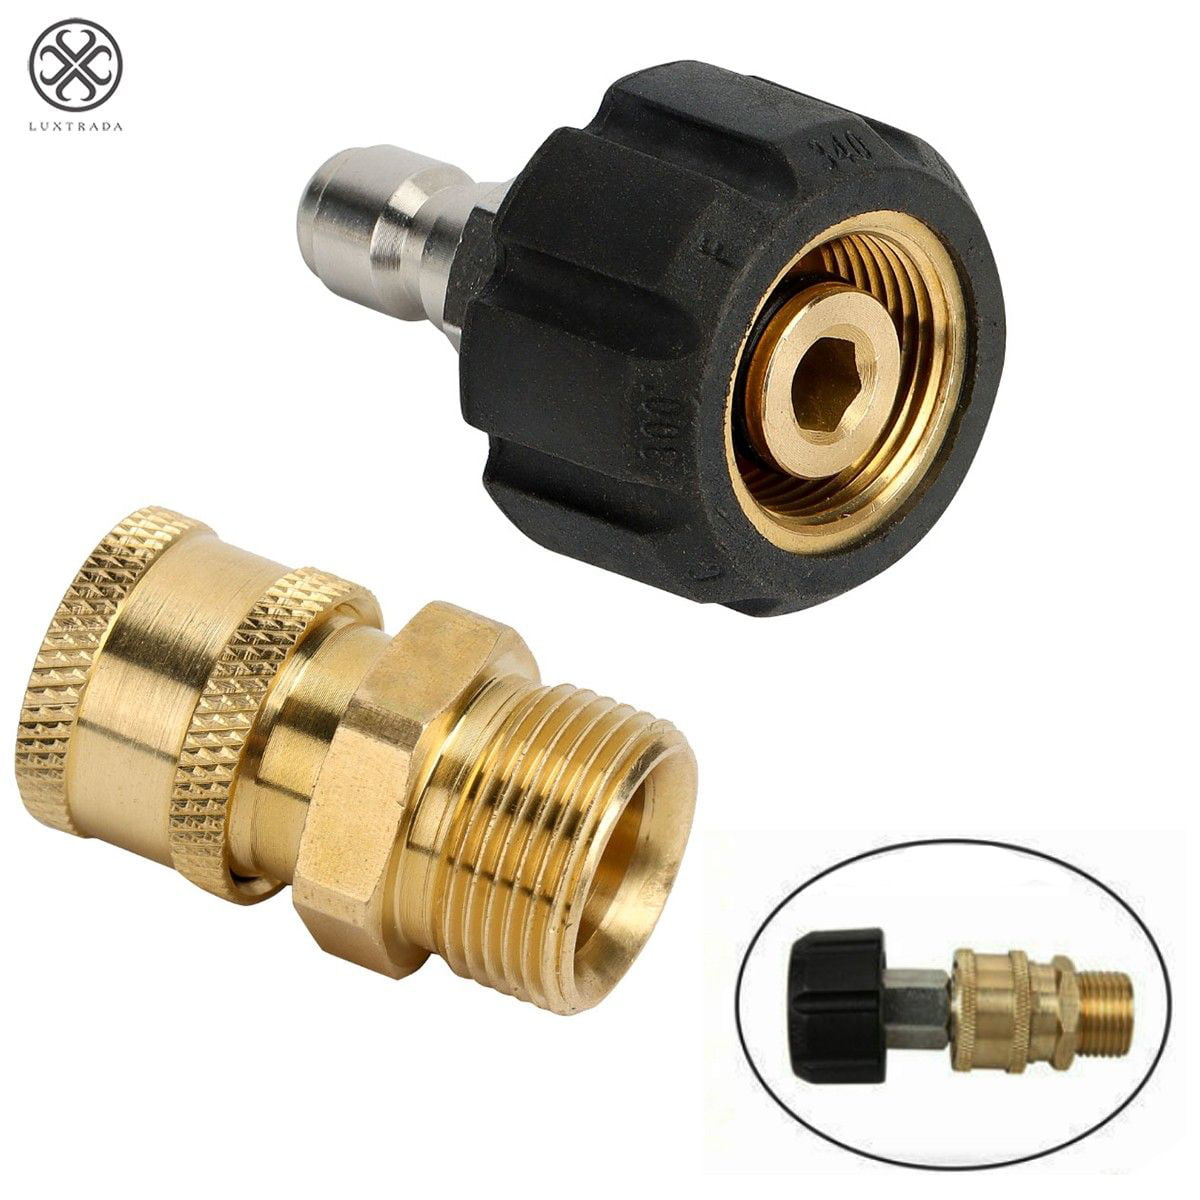 Pressure Washer Quick Connect 1/4 Socket Coupler Insulated Grip for Hot Water 